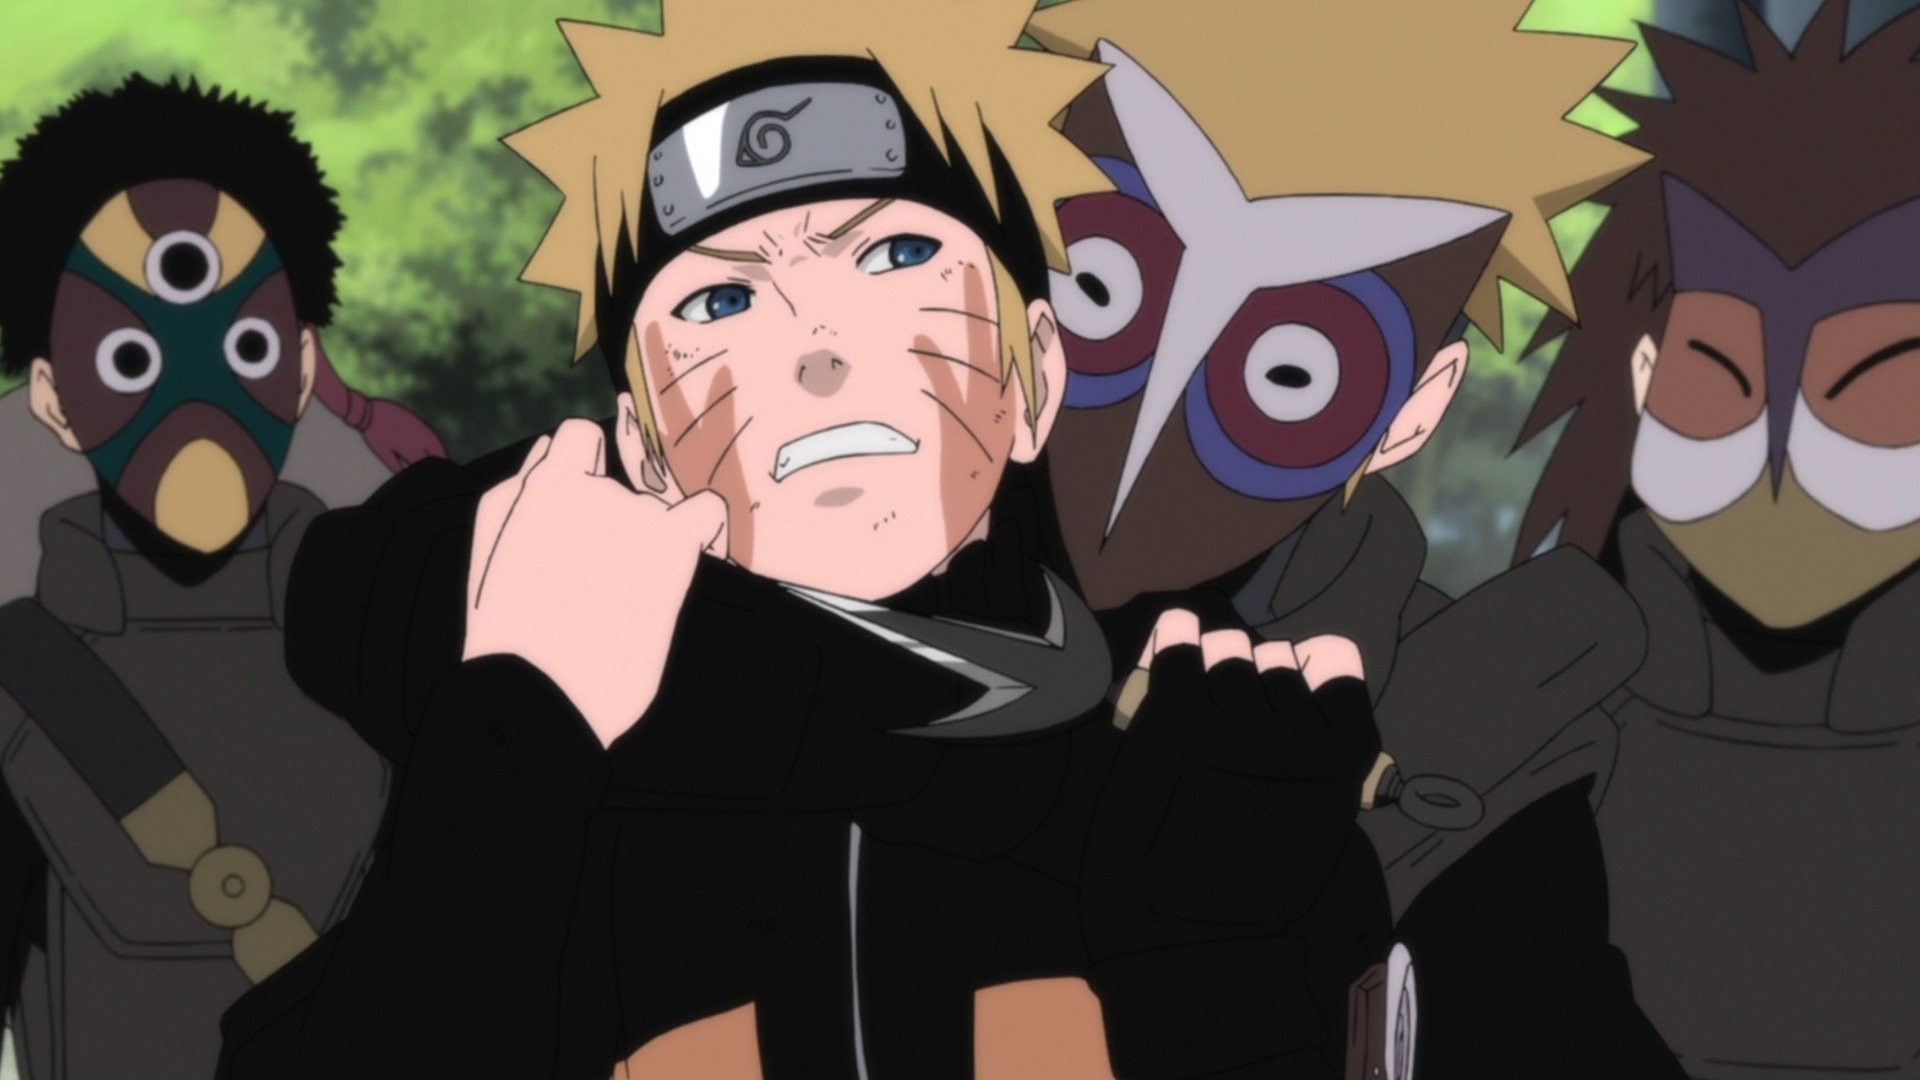 Naruto Shippuden: The Lost Tower Review – The Blog of Questioning